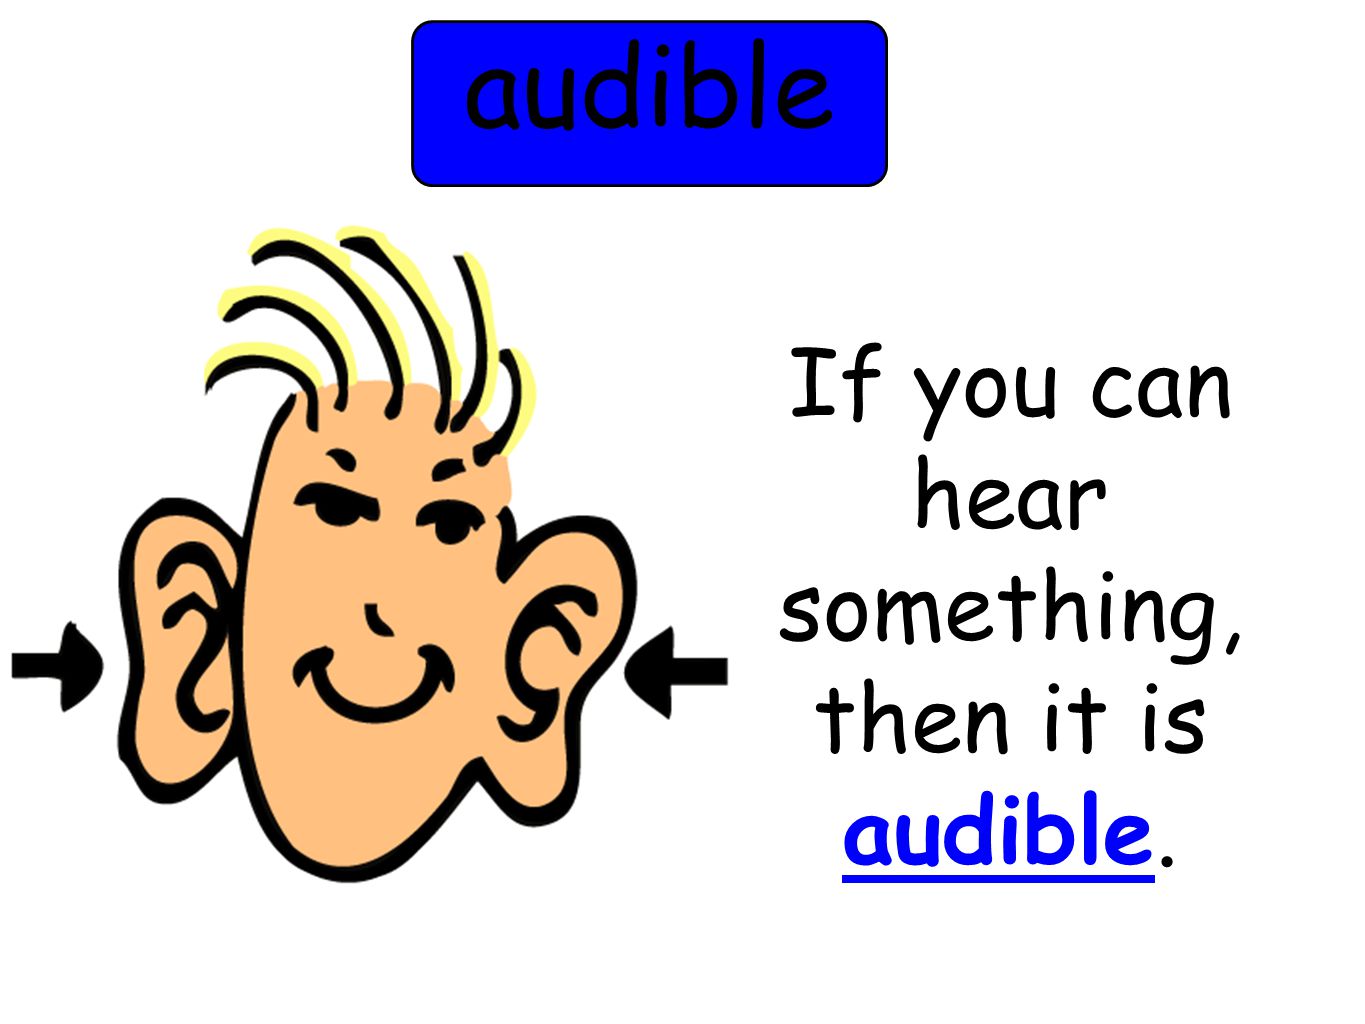 audible If you can hear something, then it is audible.